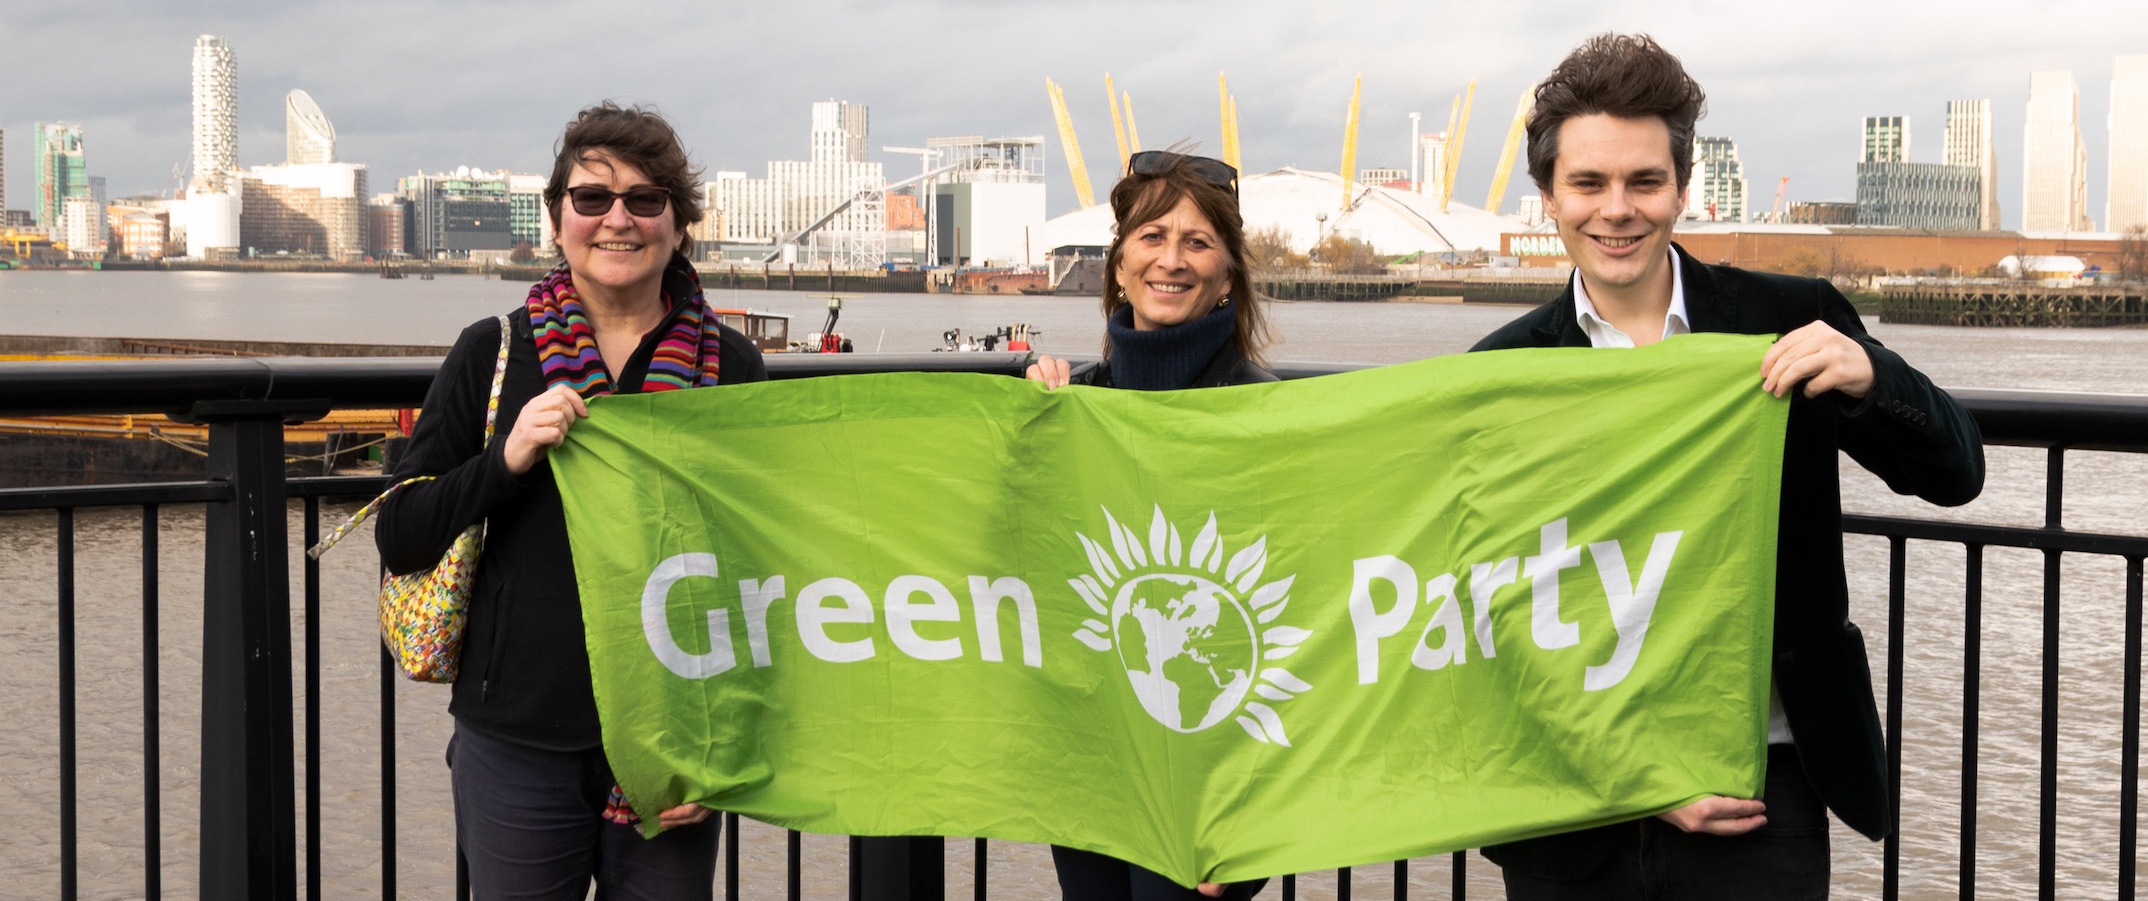 Stacy Smith, Karin Tearle and Matt Browne hold a Green Party banner in front of the River Thames